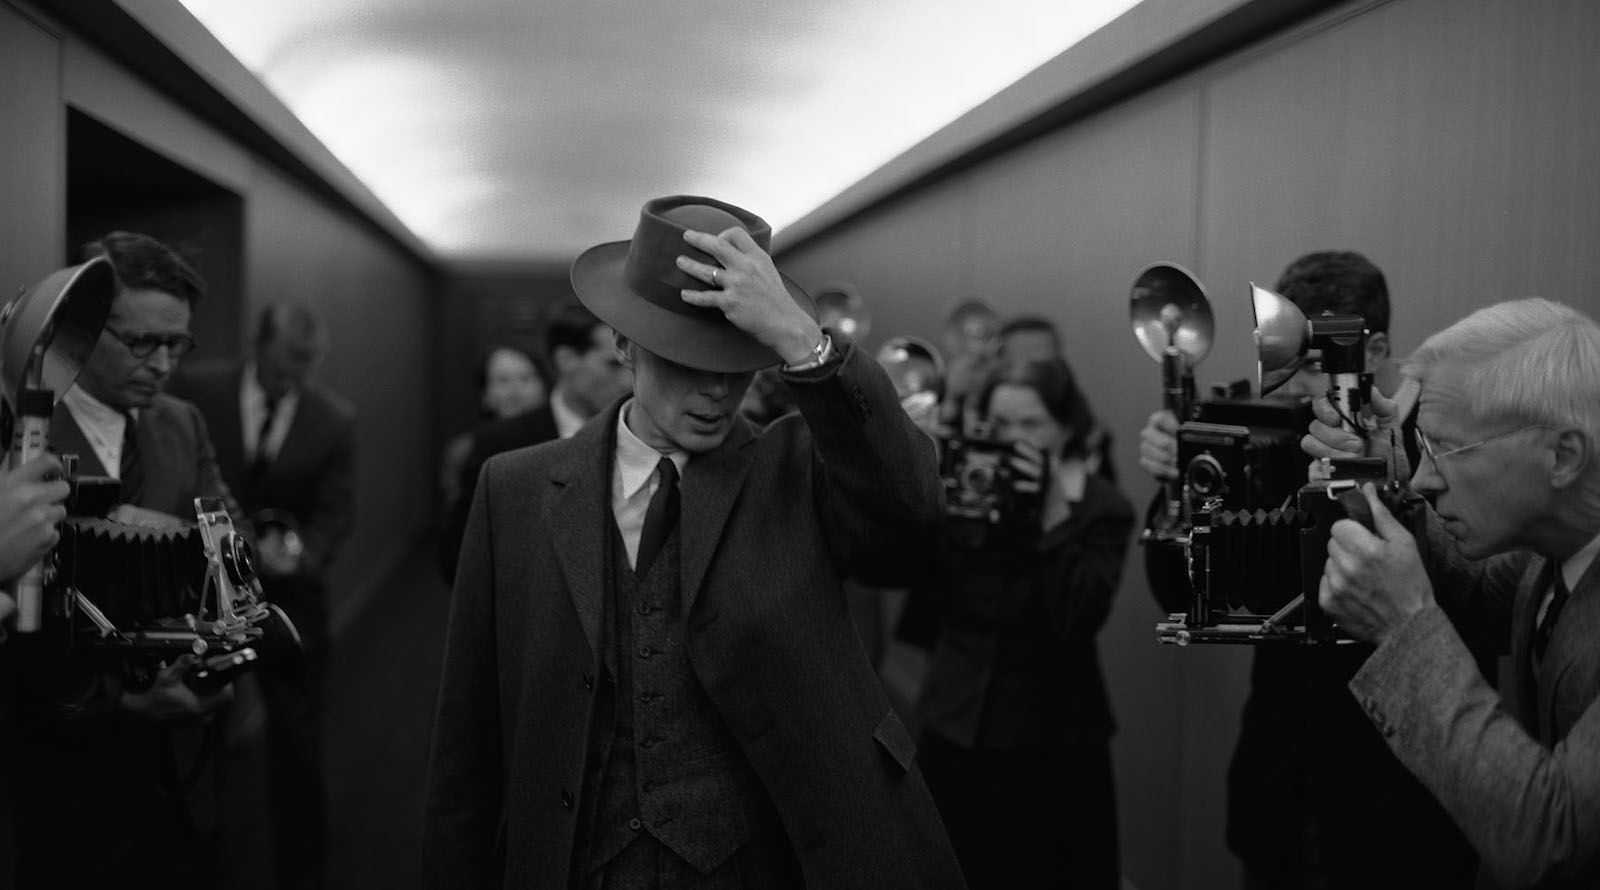 A man covers his face with his fedora as he walks down a hallway of reporters taking photographs in a black and white image